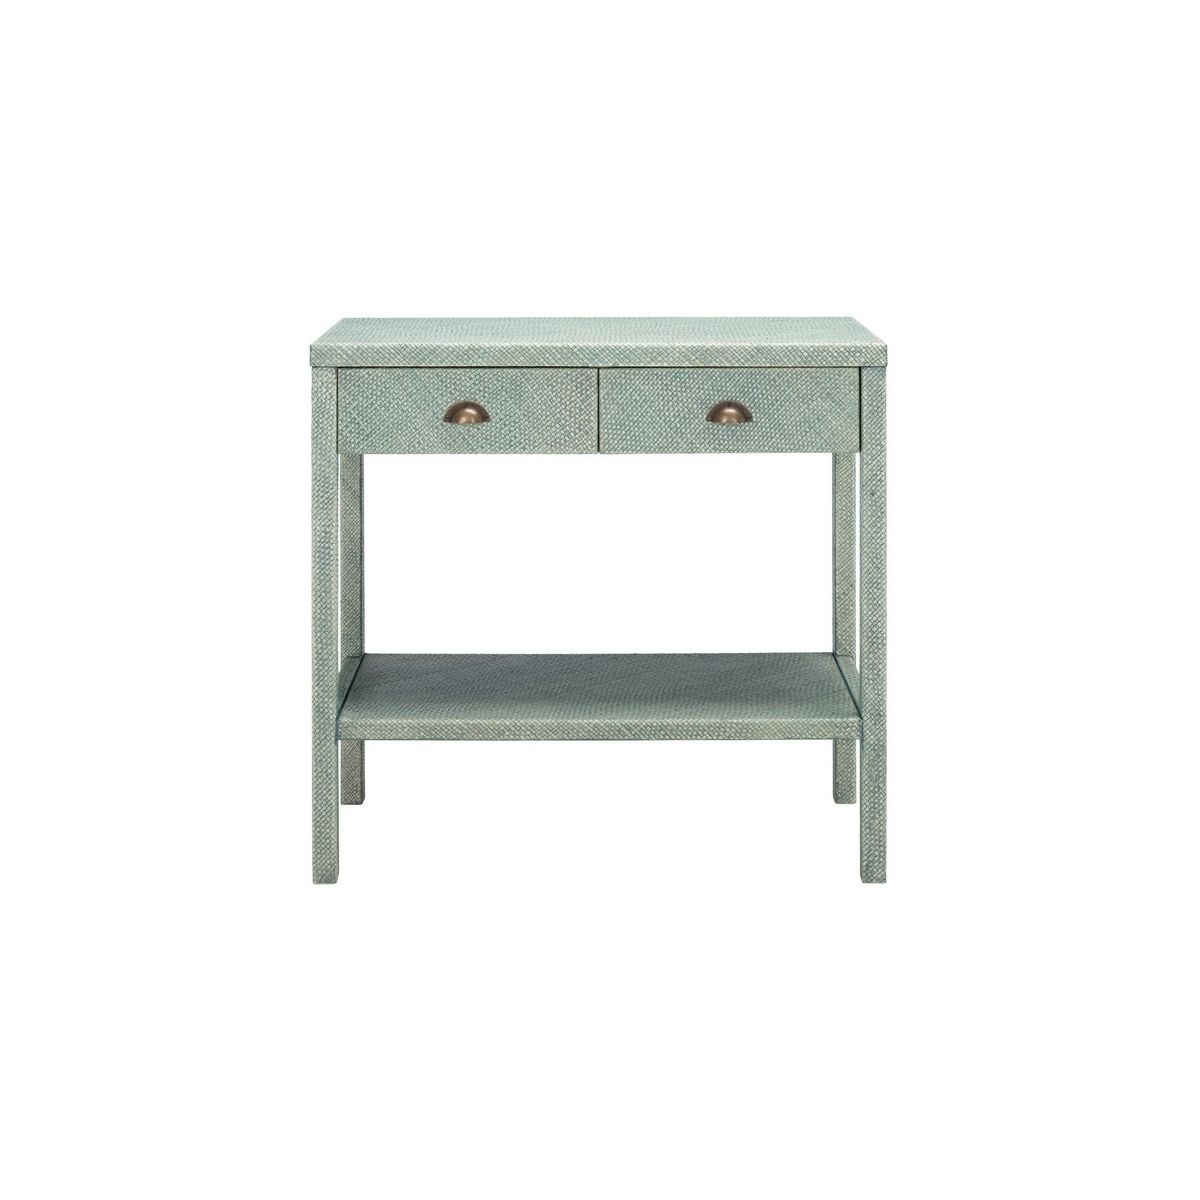 Safavieh Asa 2 Drawer 1 Shelf Console Table , CNS6602 - Turquoise / Antique Gold